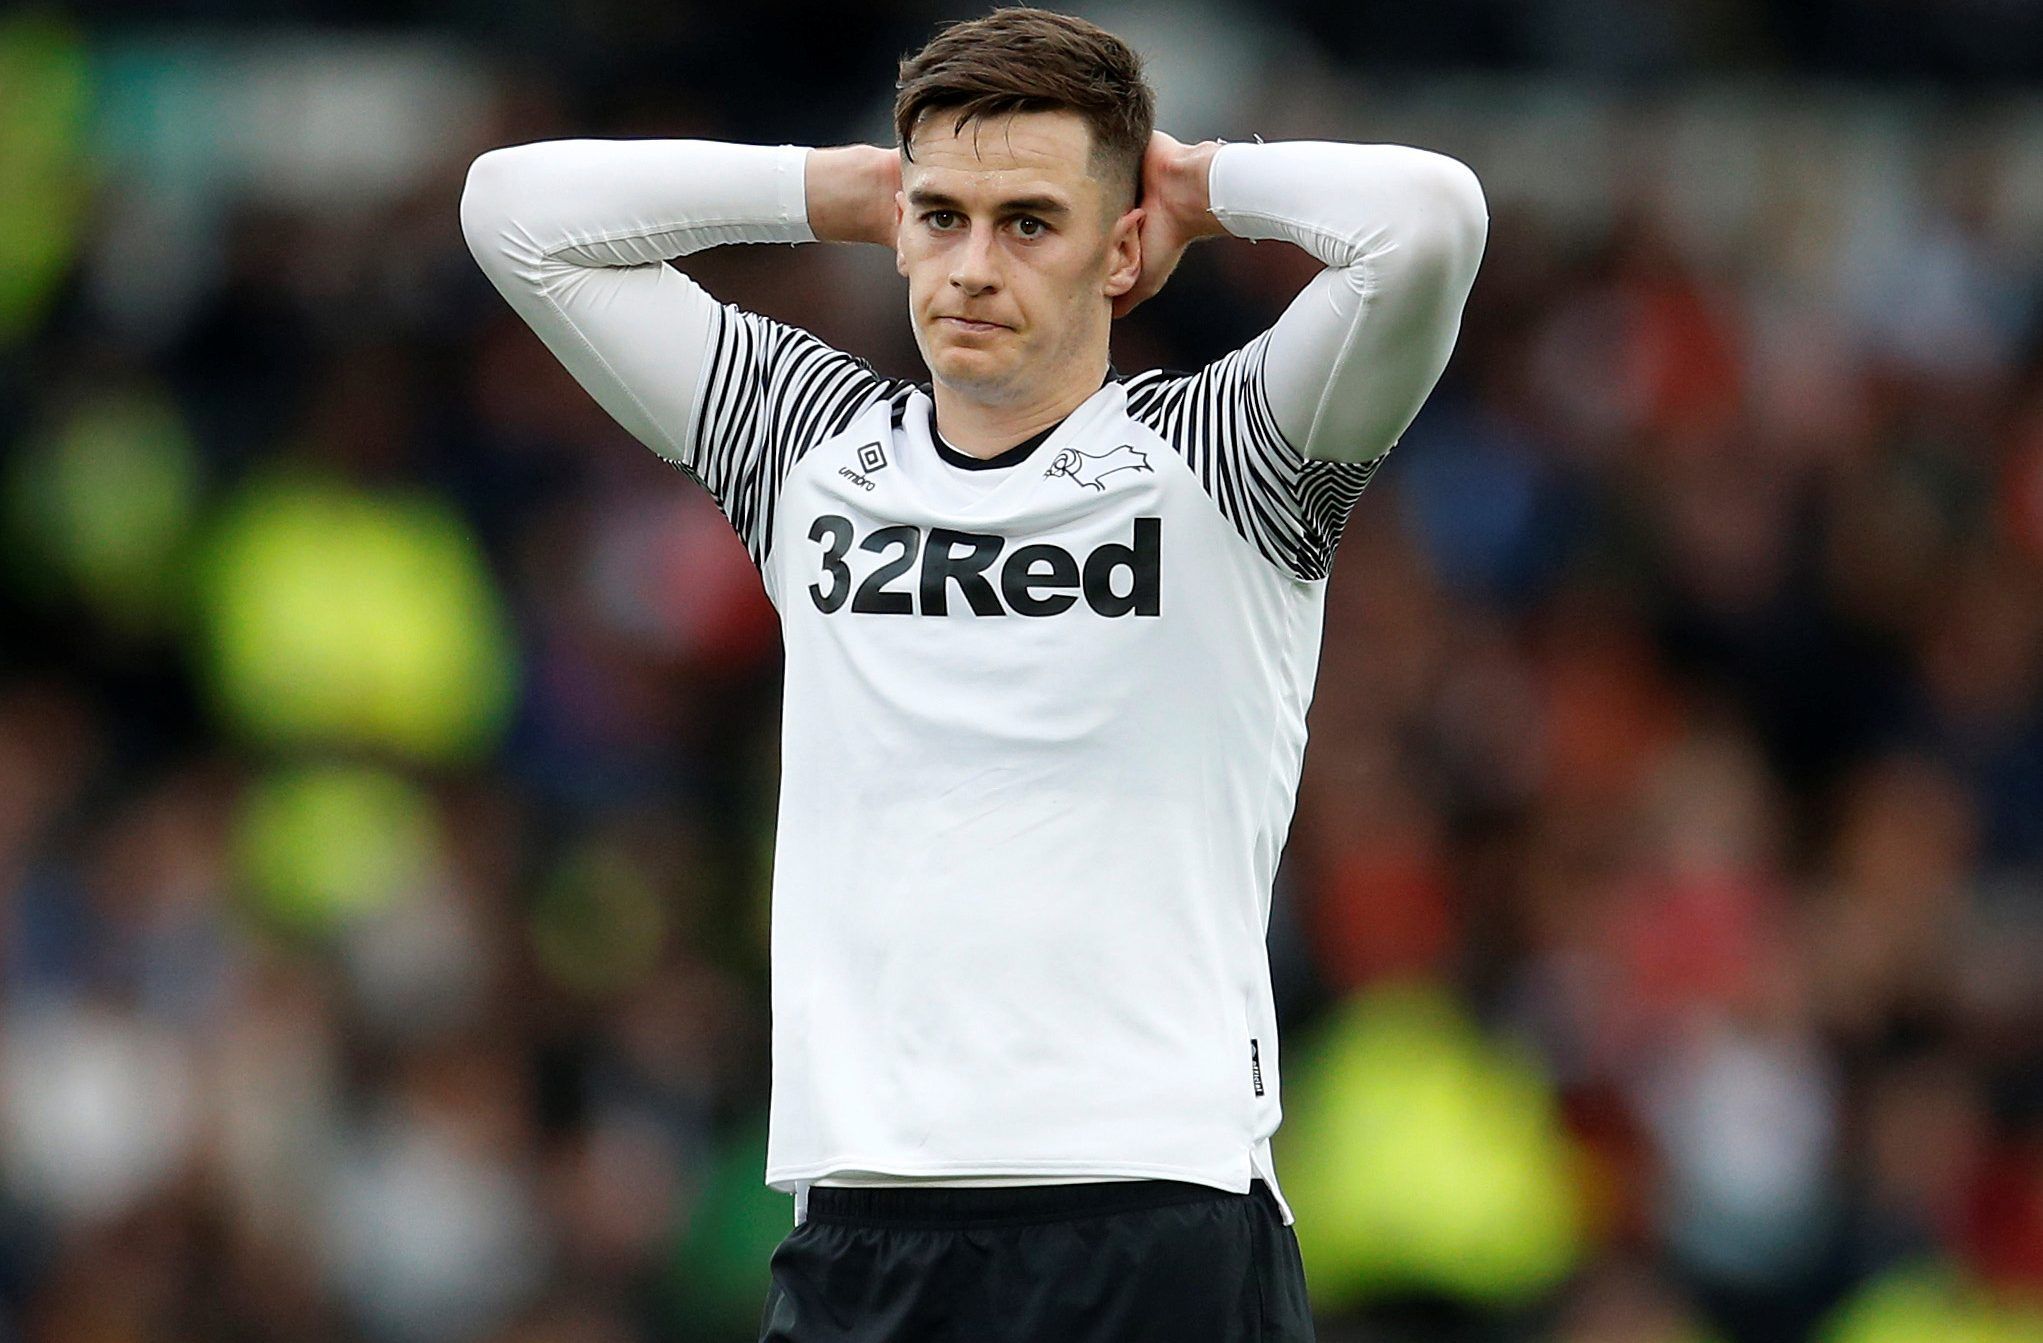 Soccer Football - Championship - Derby County v Luton Town - Pride Park, Derby, Britain - October 5, 2019  Derby County's Tom Lawrence reacts to a missed chance to score  Action Images/Ed Sykes  EDITORIAL USE ONLY. No use with unauthorized audio, video, data, fixture lists, club/league logos or 